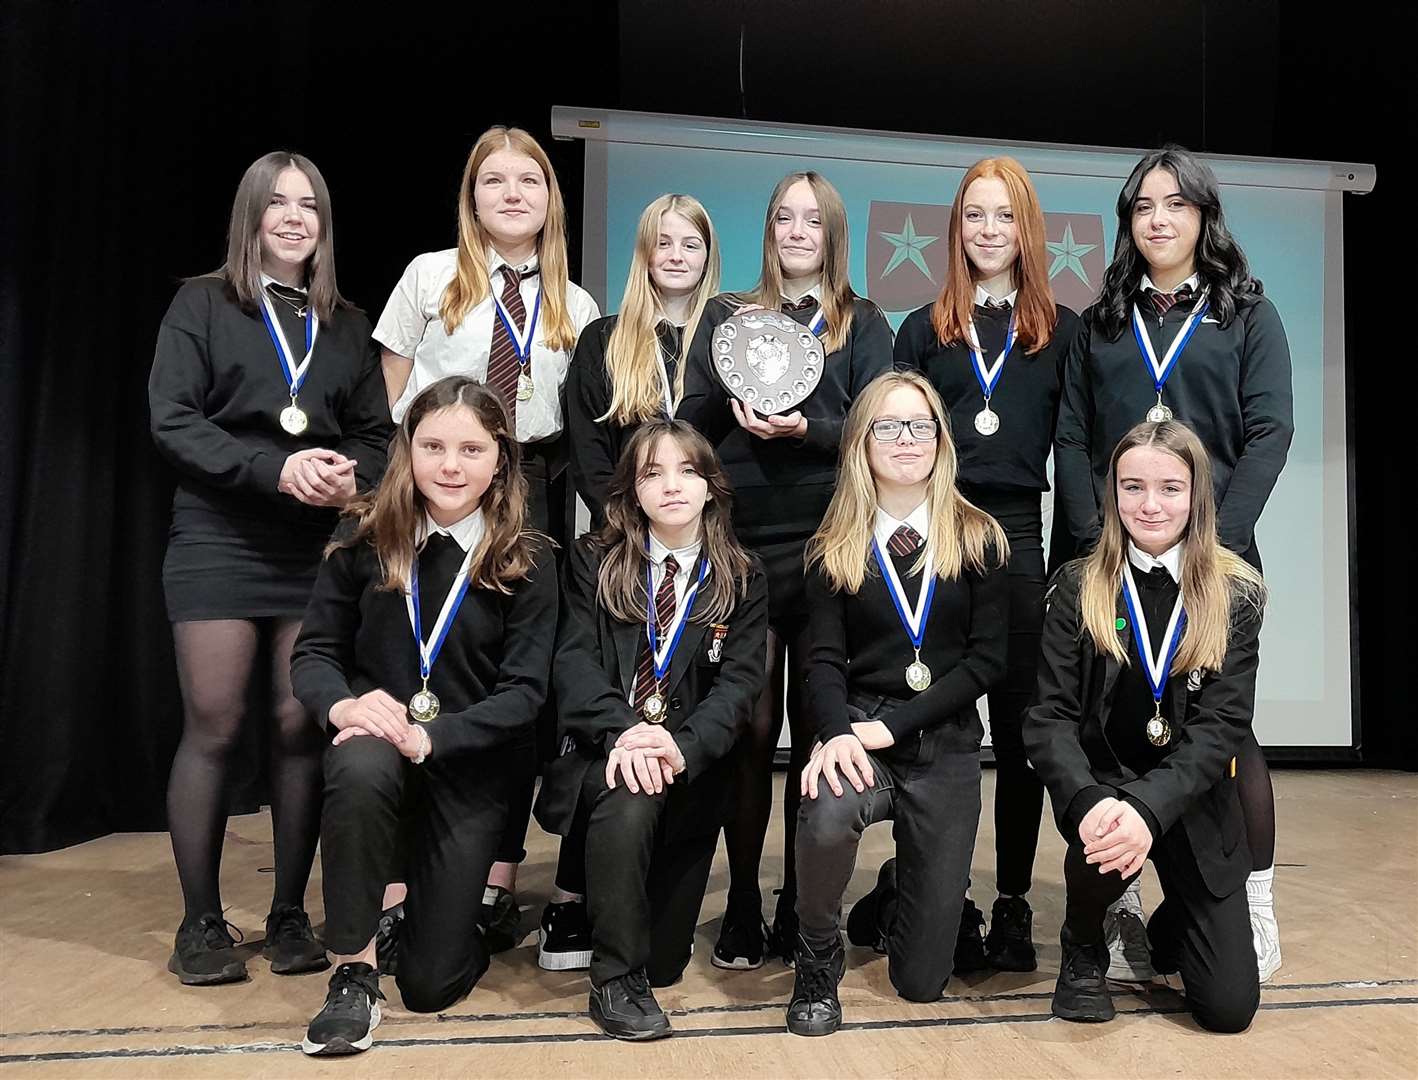 The winning team show off their medals and trophy at a school assembly on Monday.